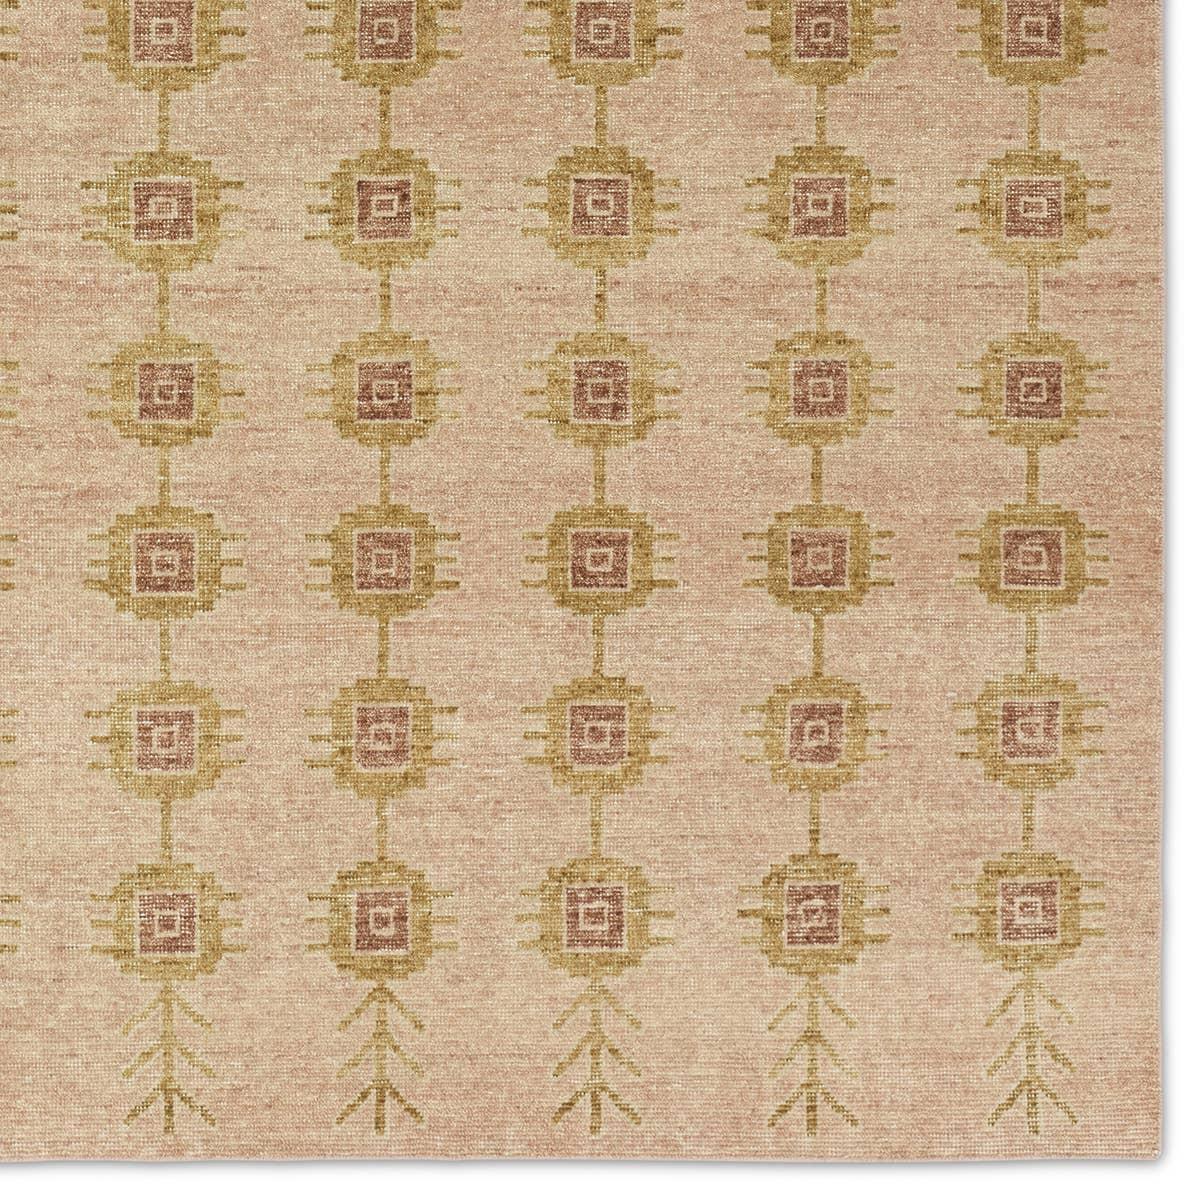 The Onessa Aeston marries traditional motifs with soft, subdued colorways for the perfect blend of fresh and time-honored style. These hand-knotted wool rugs feature a hand-sheared quality that lends the design a coveted vintage impression. The Aeston rug features a distressed tile pattern in hues of brown and tan. Amethyst Home provides interior design, new home construction design consulting, vintage area rugs, and lighting in the Miami metro area.